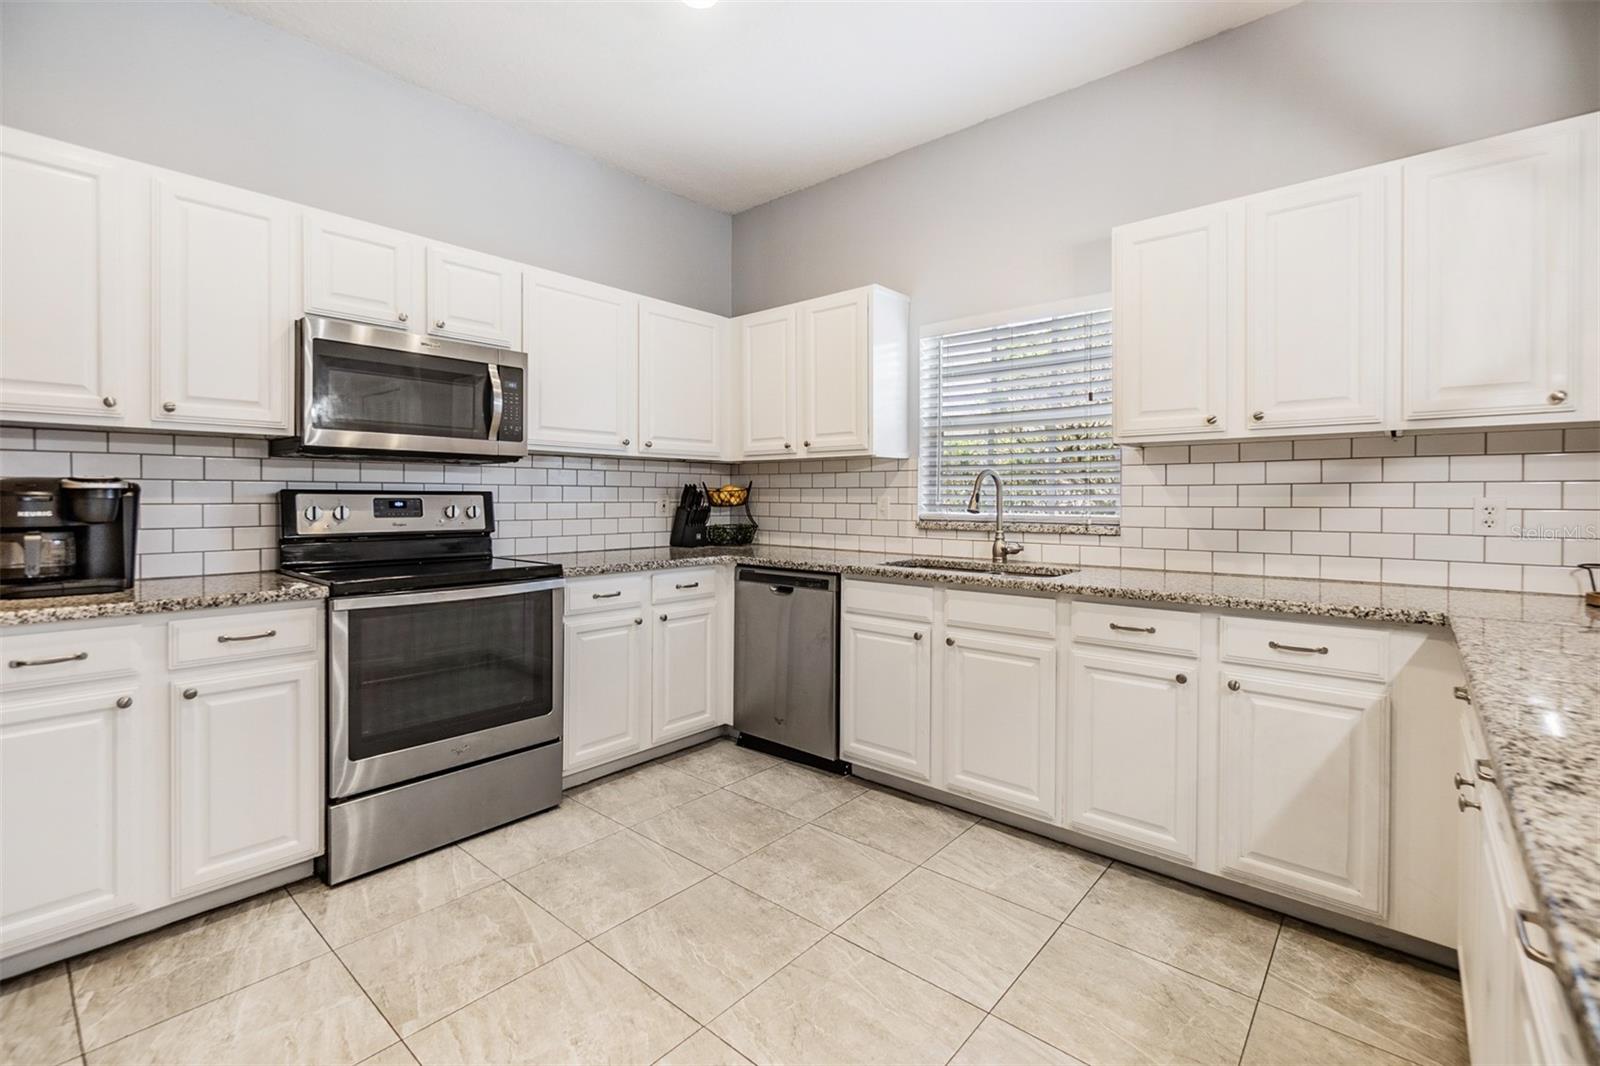 Large and Open kitchen with new light fixture, Subway tile backsplash, Granite Countertops, and Stainless Steel appliances.